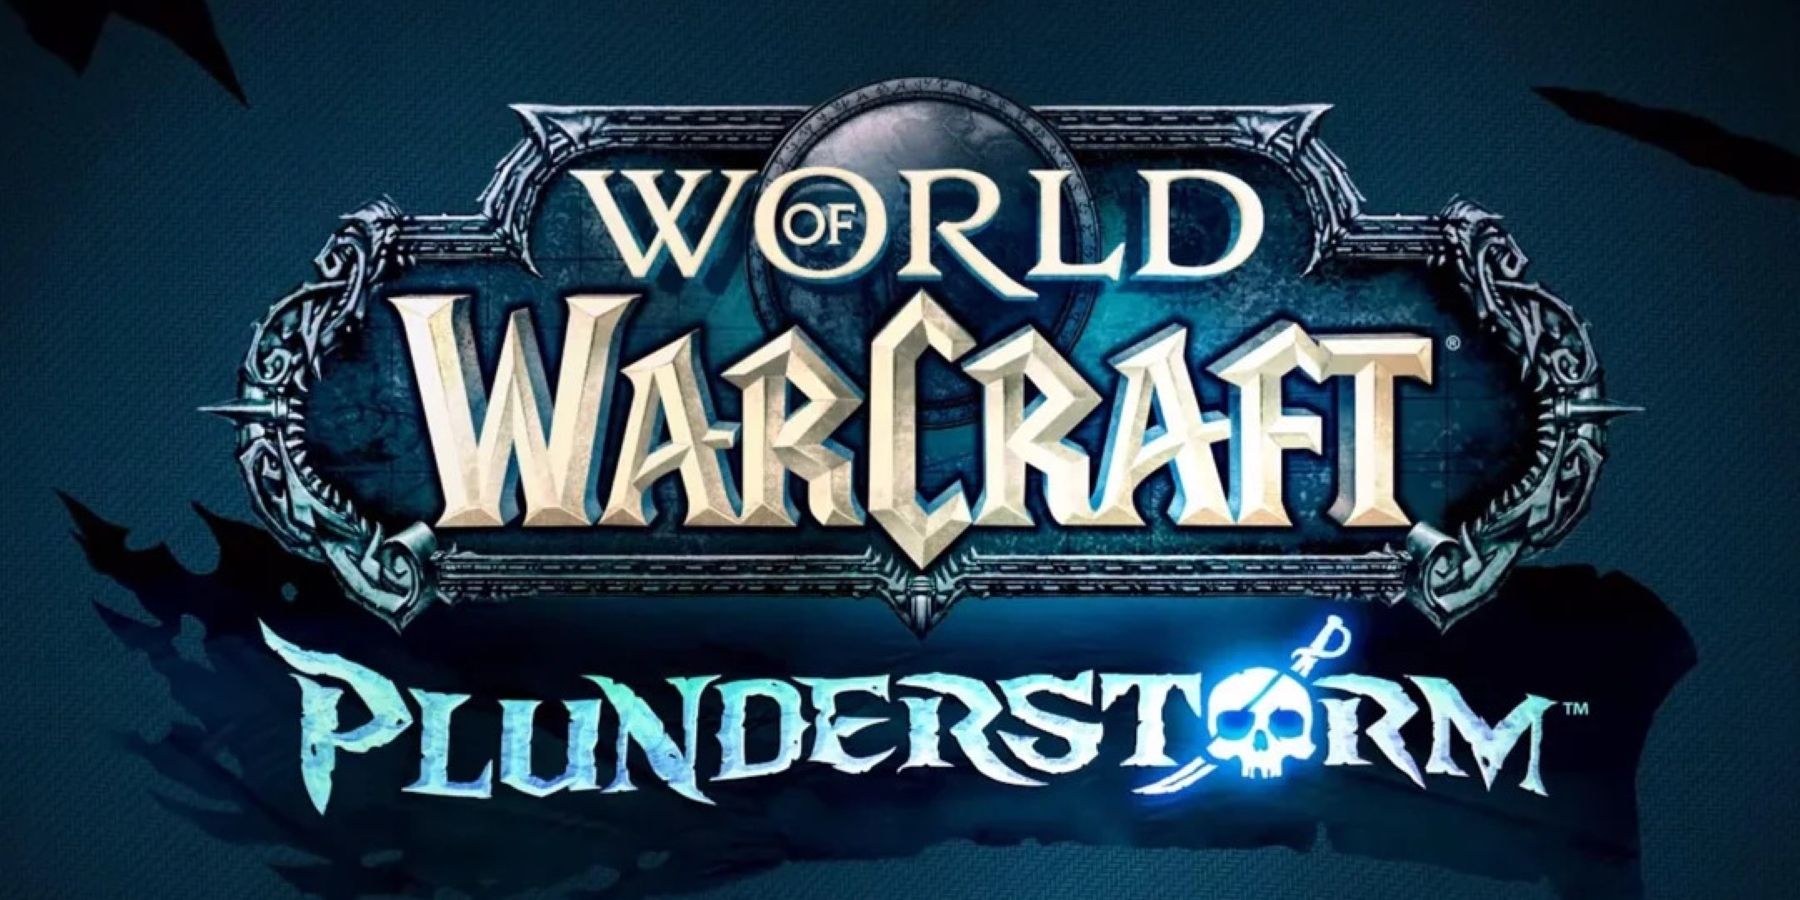 World of Warcraft Adding New Way to Play Plunderstorm Battle Royale